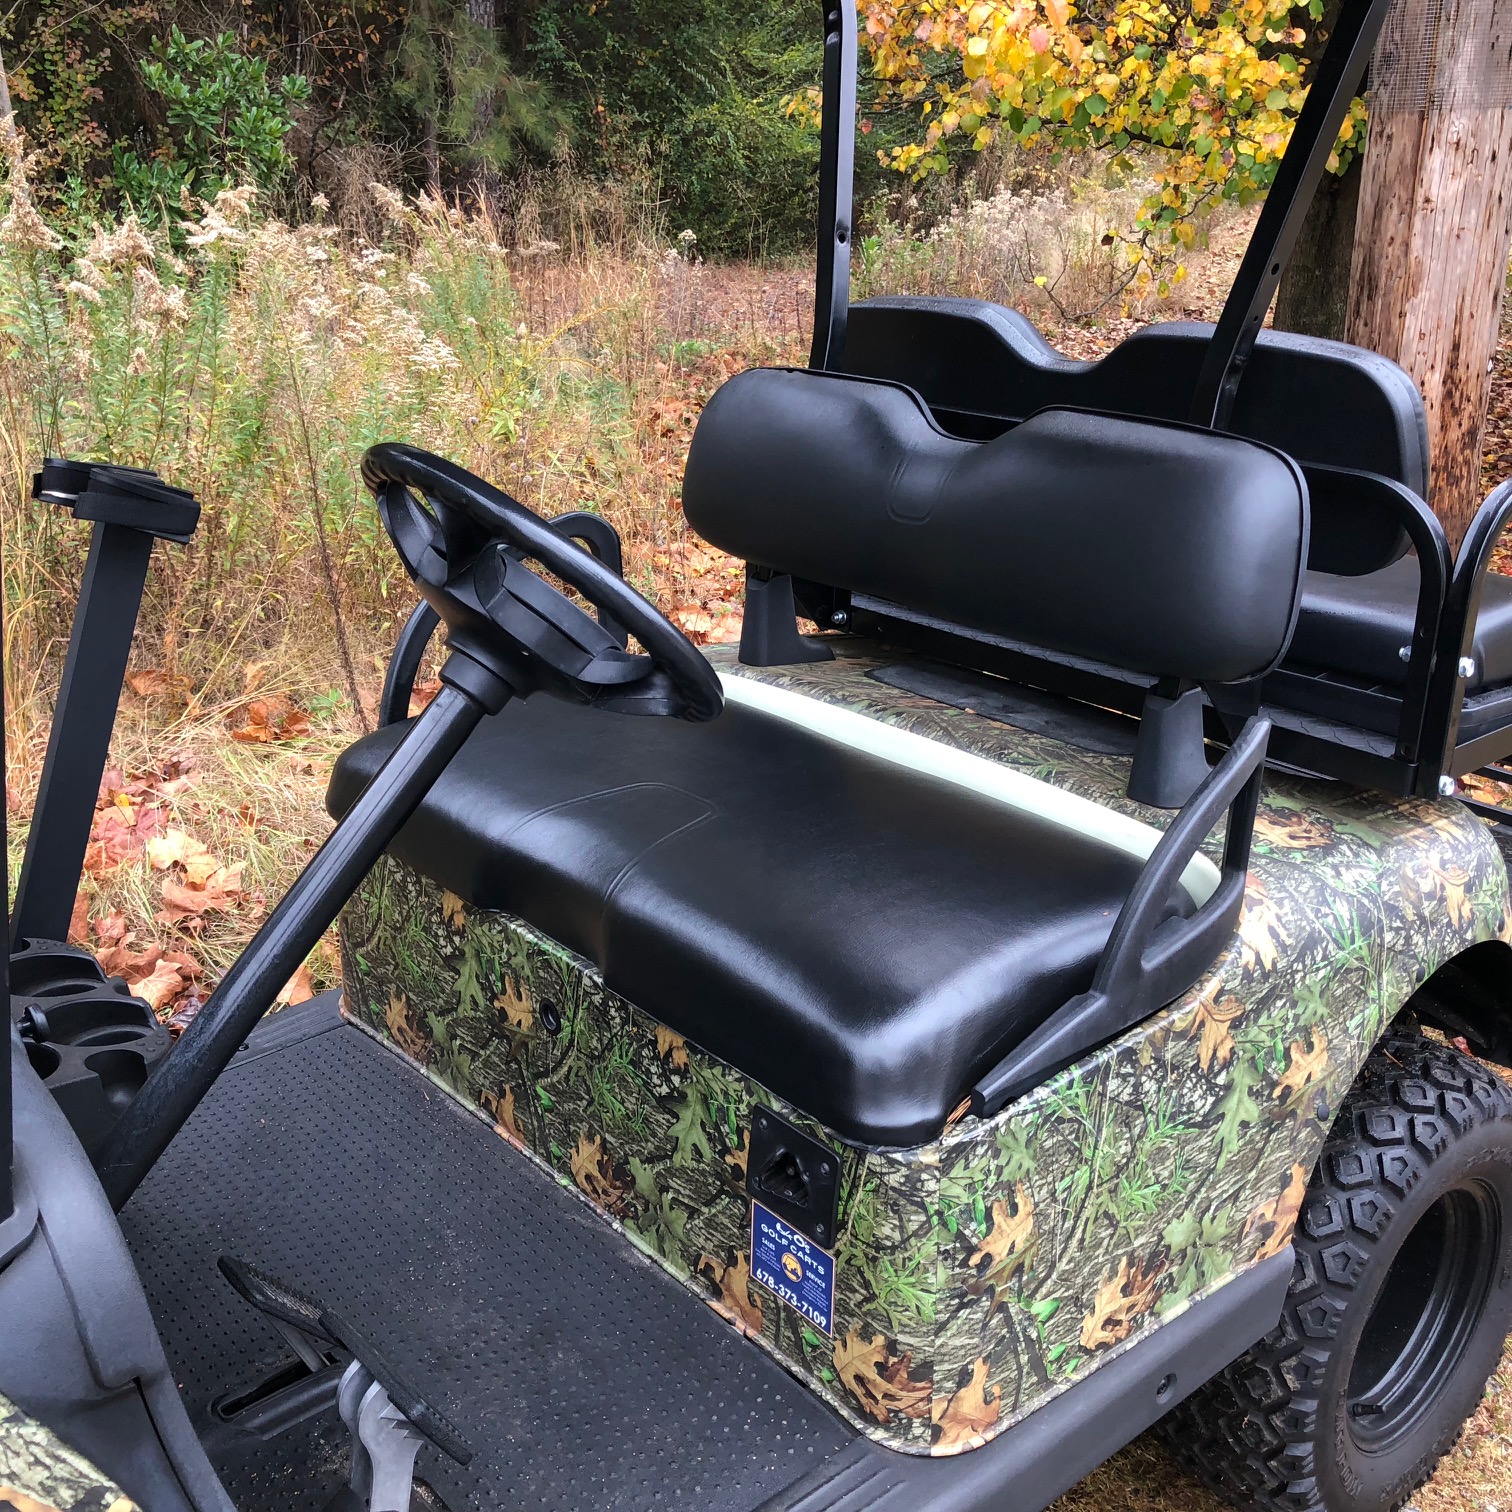 Golf carts setup for hunting ,let's see them !!!!!